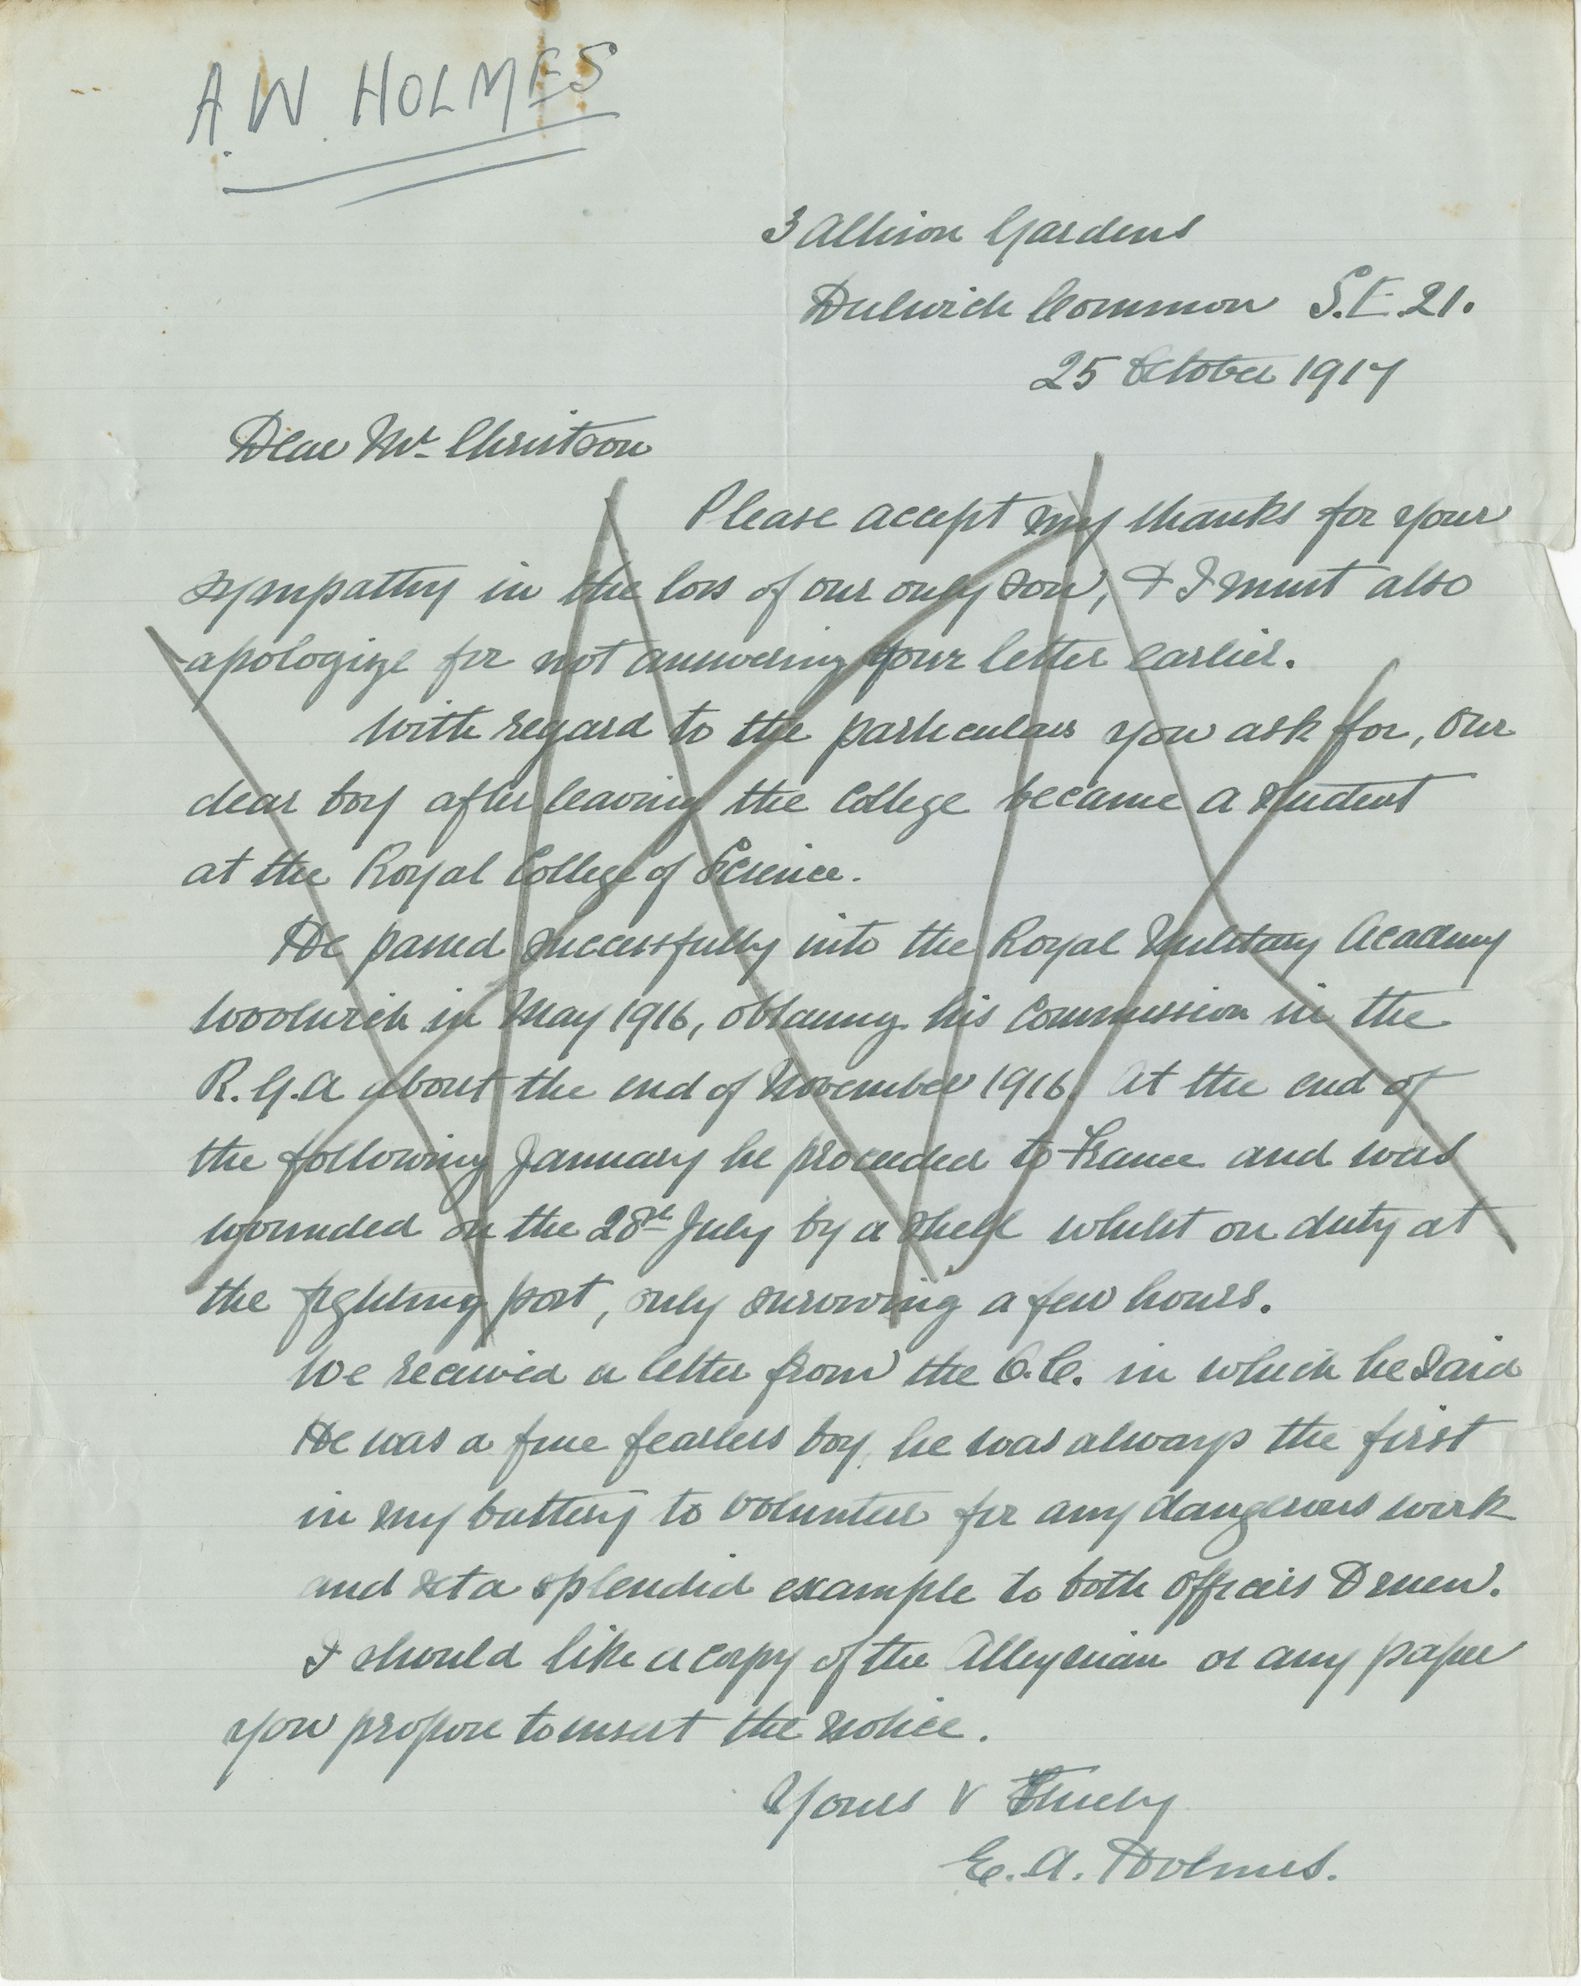 Holmes AW Second Mother Letter